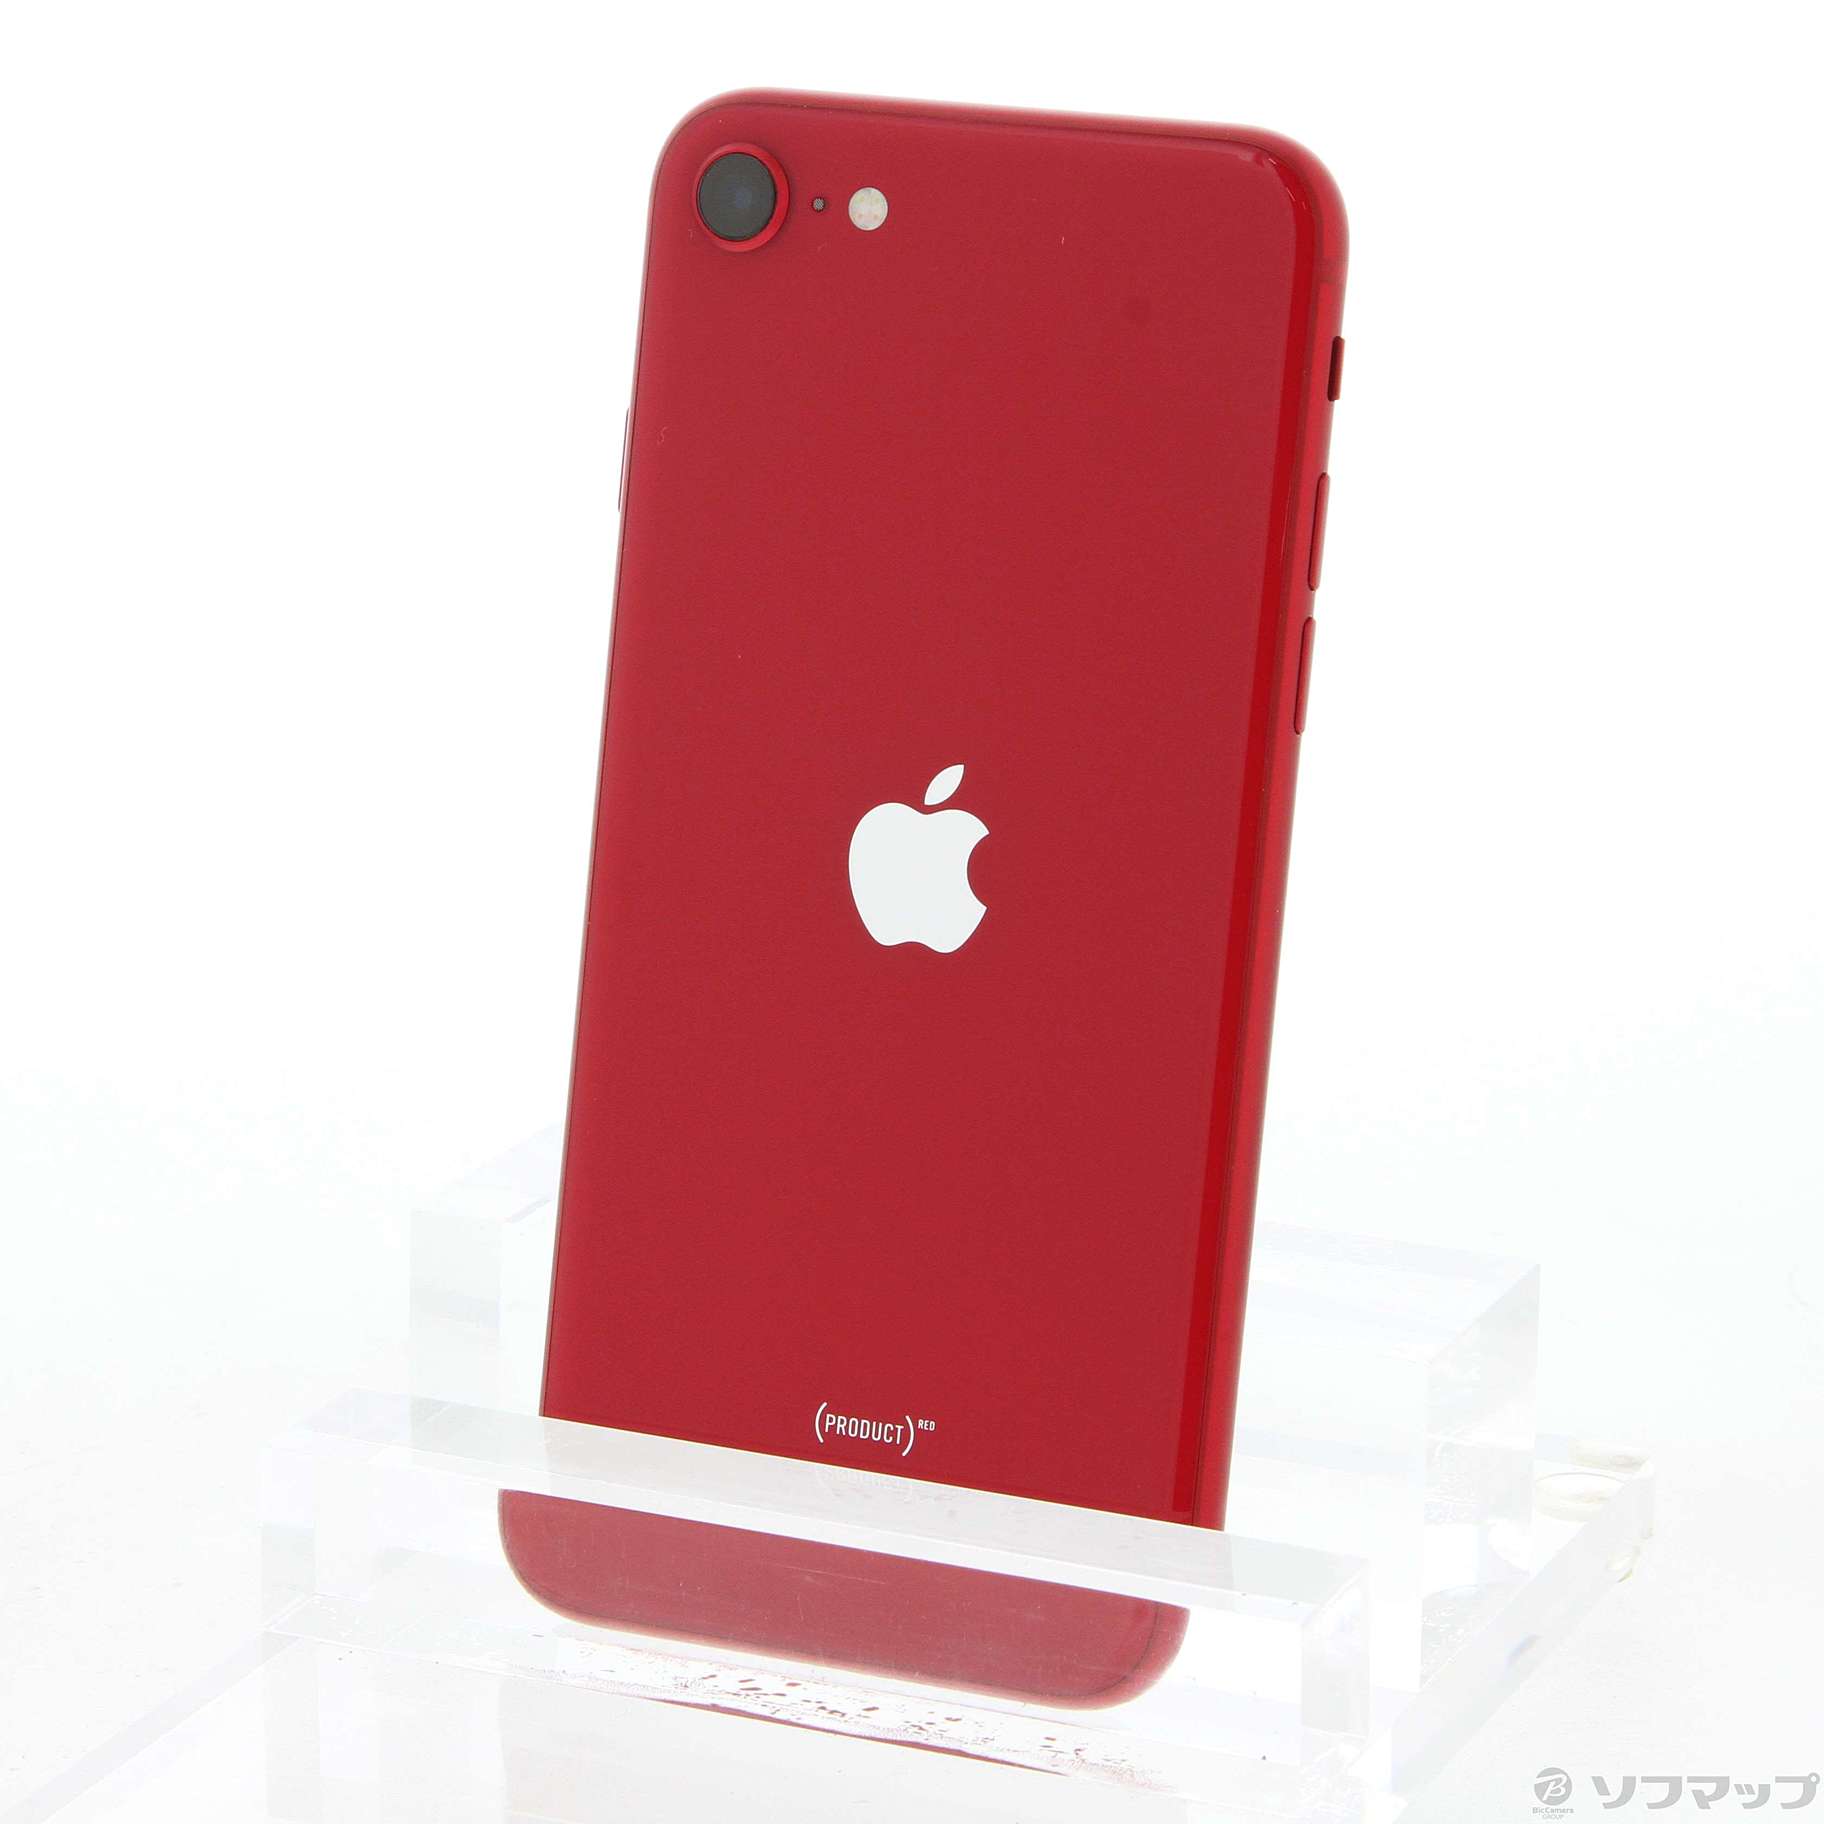 iPhoneSE第2世代128GB (PRODUCT)RED SIMフリー | www.sportique.nu